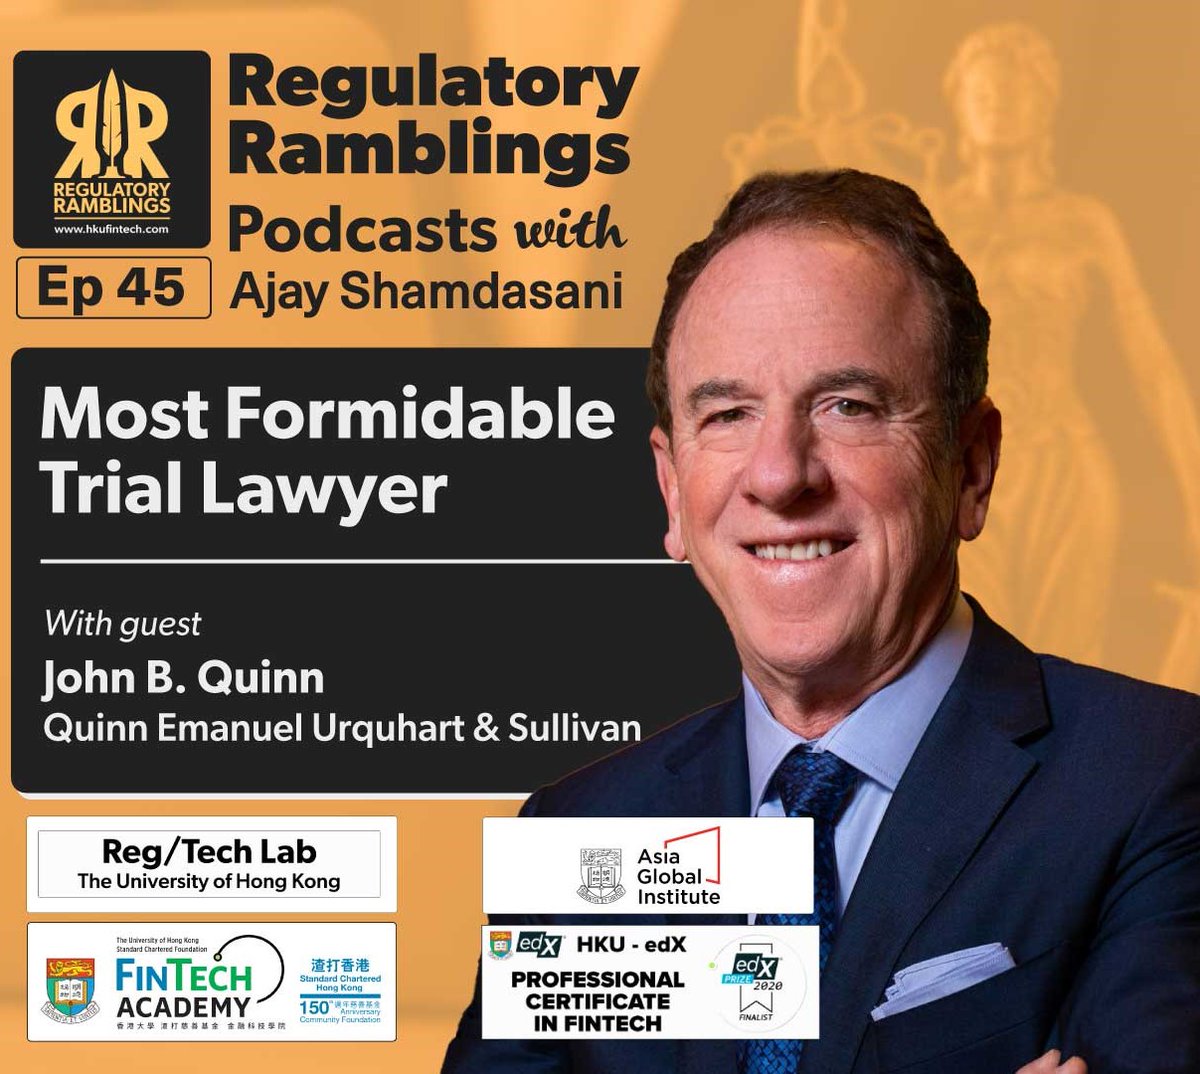 🎙️ Join @jbqlaw on 'Regulatory Ramblings' as he shares his journey, insights on Chinese fintech, and thoughts on global arbitration hubs. Packed with wisdom and inspiration! Listen now: hkufintech.com/regulatoryramb… @quinnemanuel @HKUFinTech #LegalProfession #Podcast #Inspiration